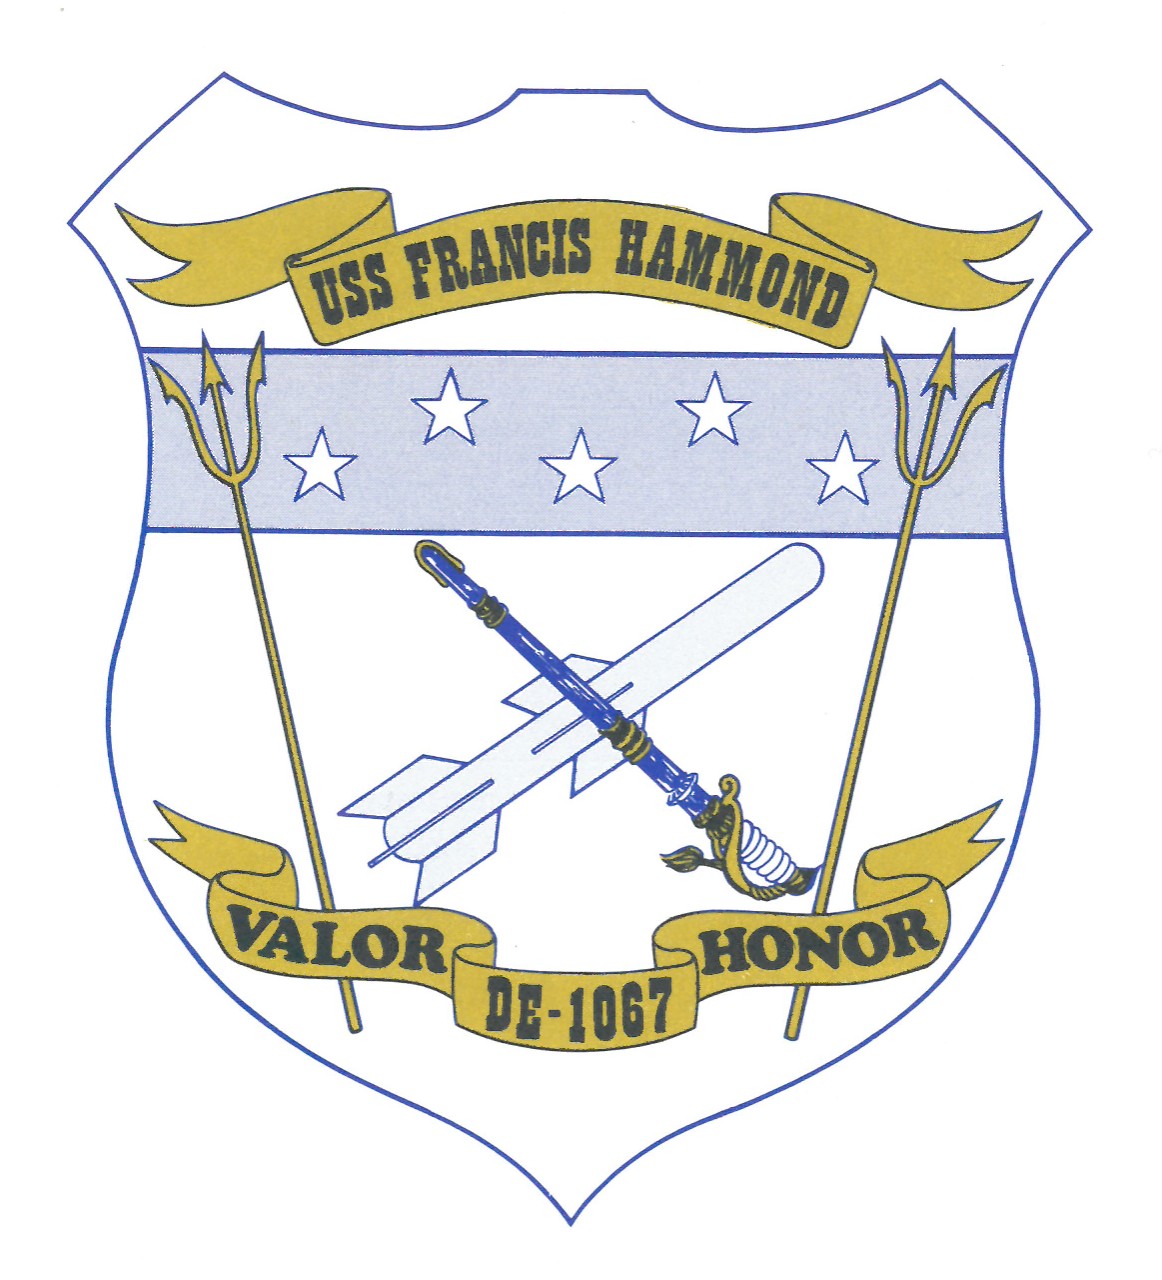 Francis Hammond’s insignia honors the life and deeds of HM3 Francis C. Hammond, as well as the ship’s own role in protecting the United States. Shaped similar to a hospital corpsman’s badge, the crest bears a blue stripe with five stars symbolizi...